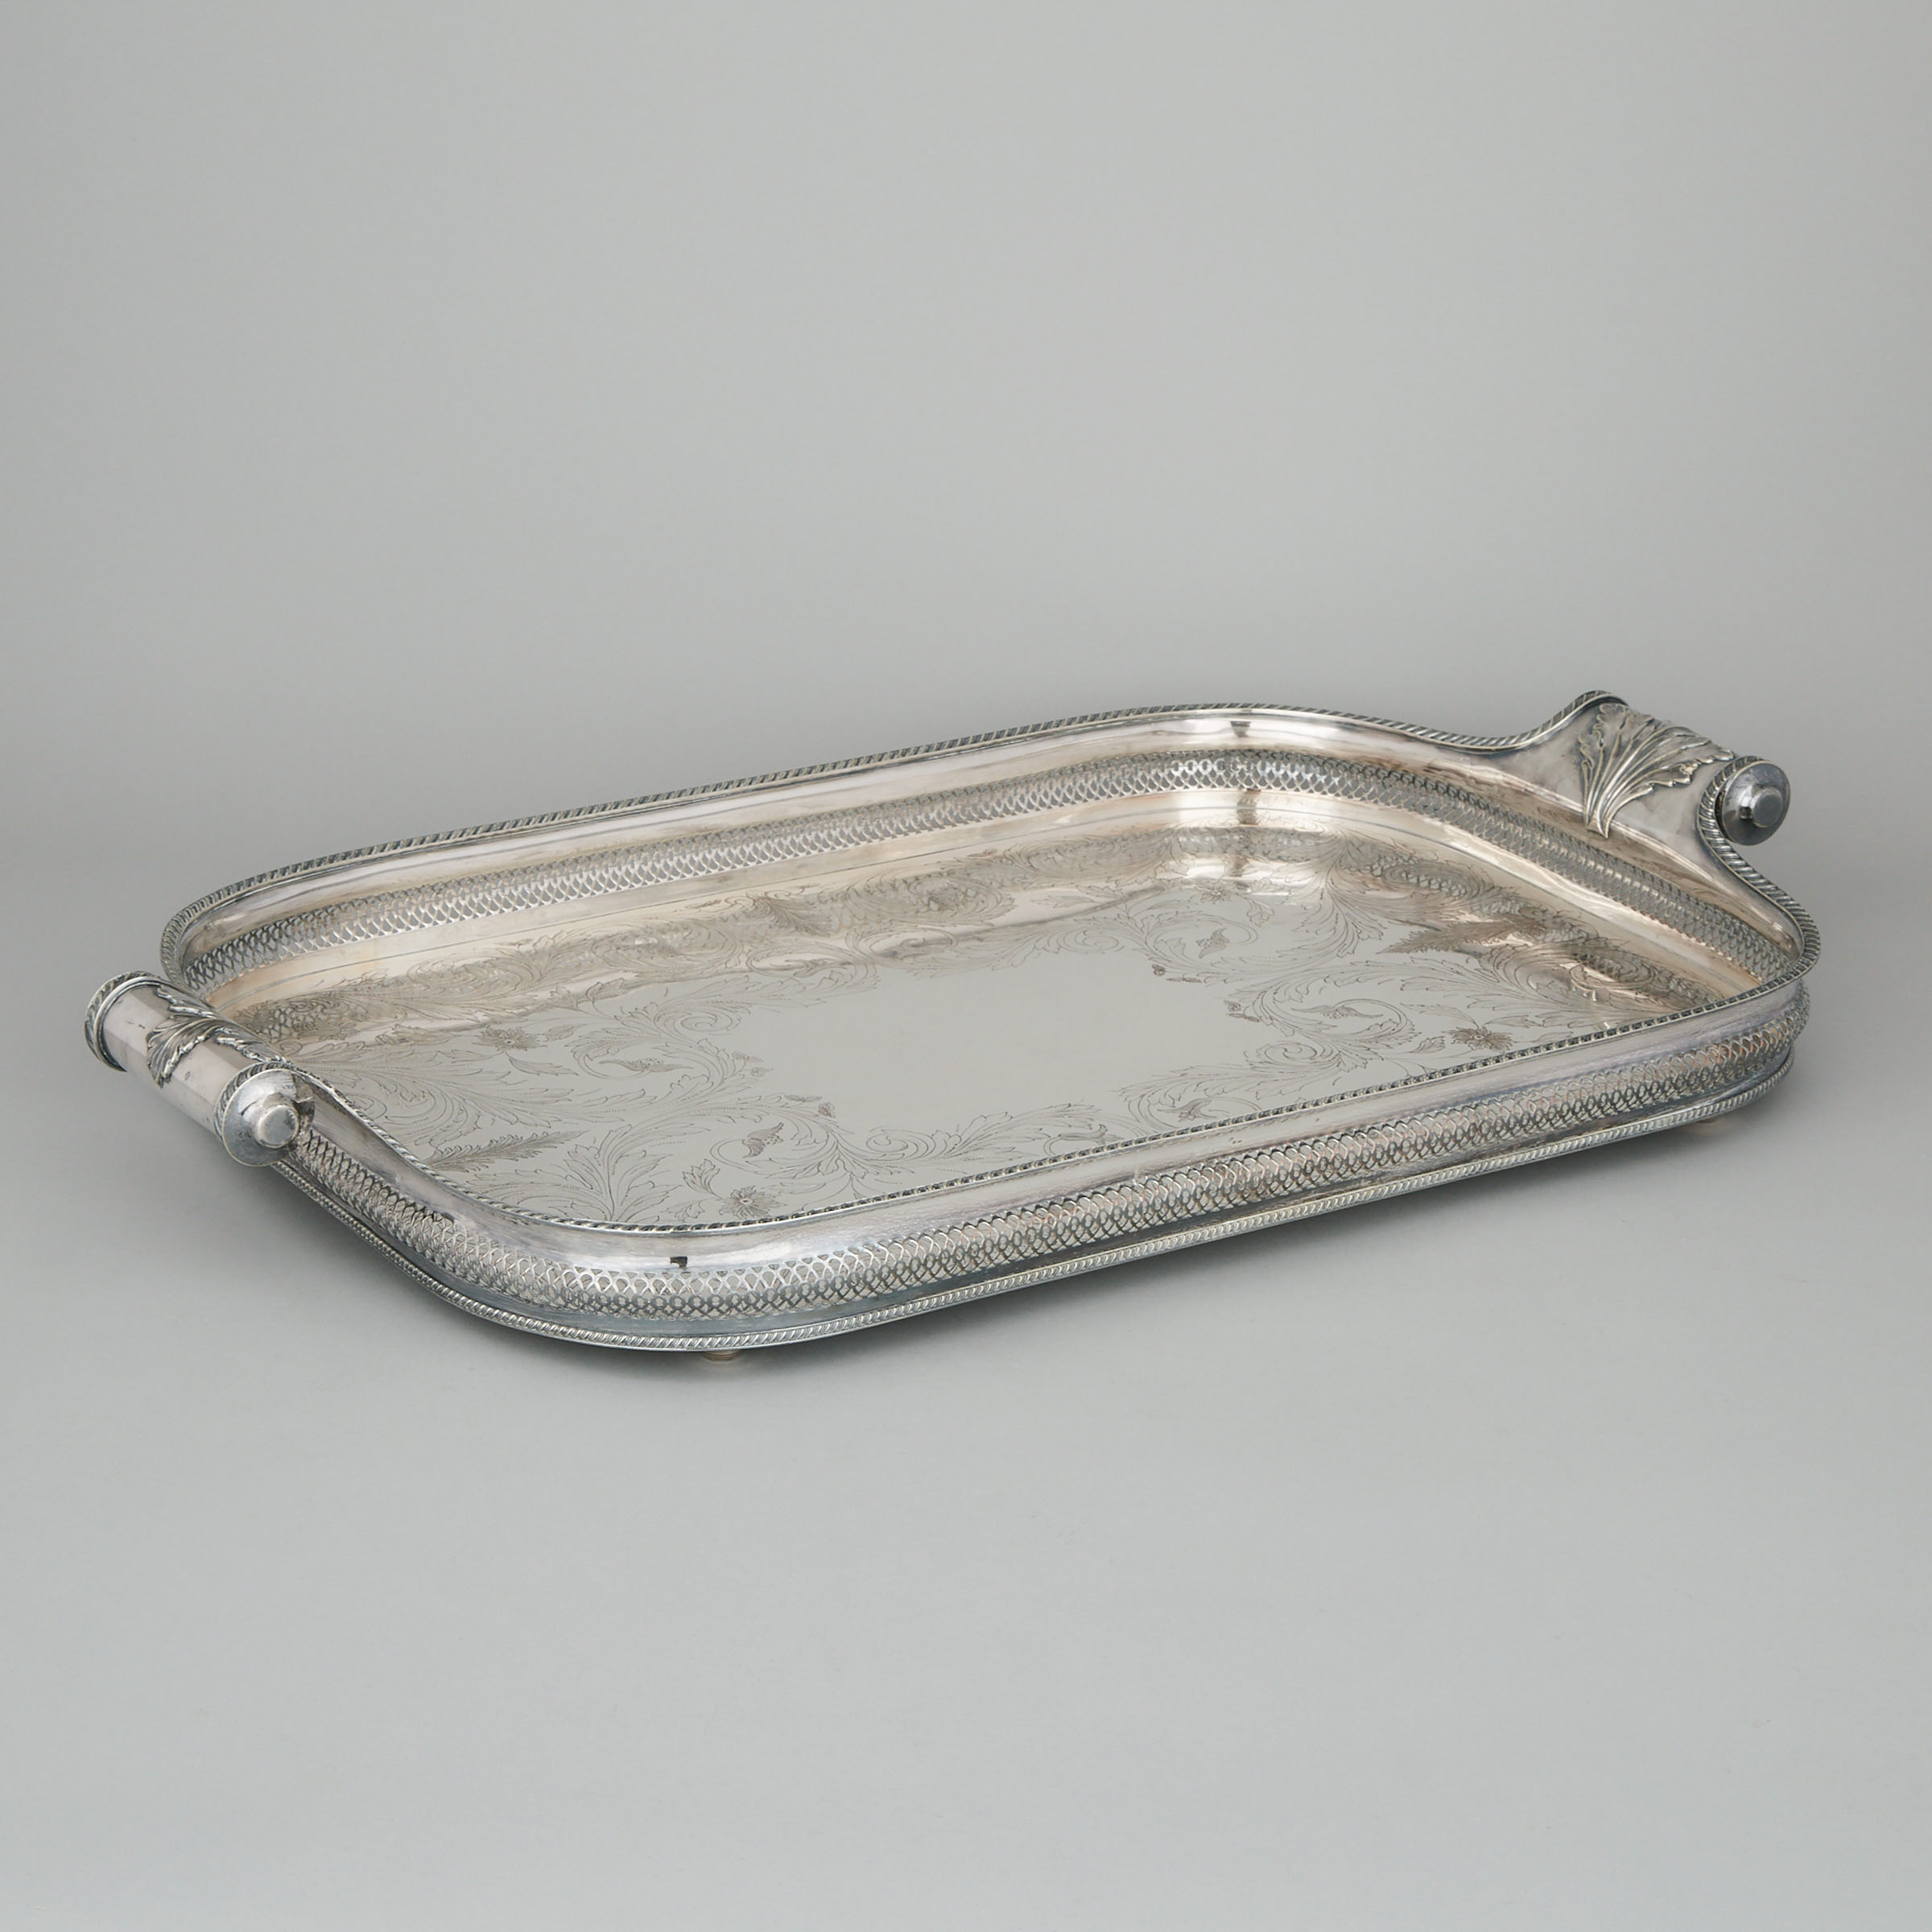 English Silver Plated Galleried Serving Tray, 20th century